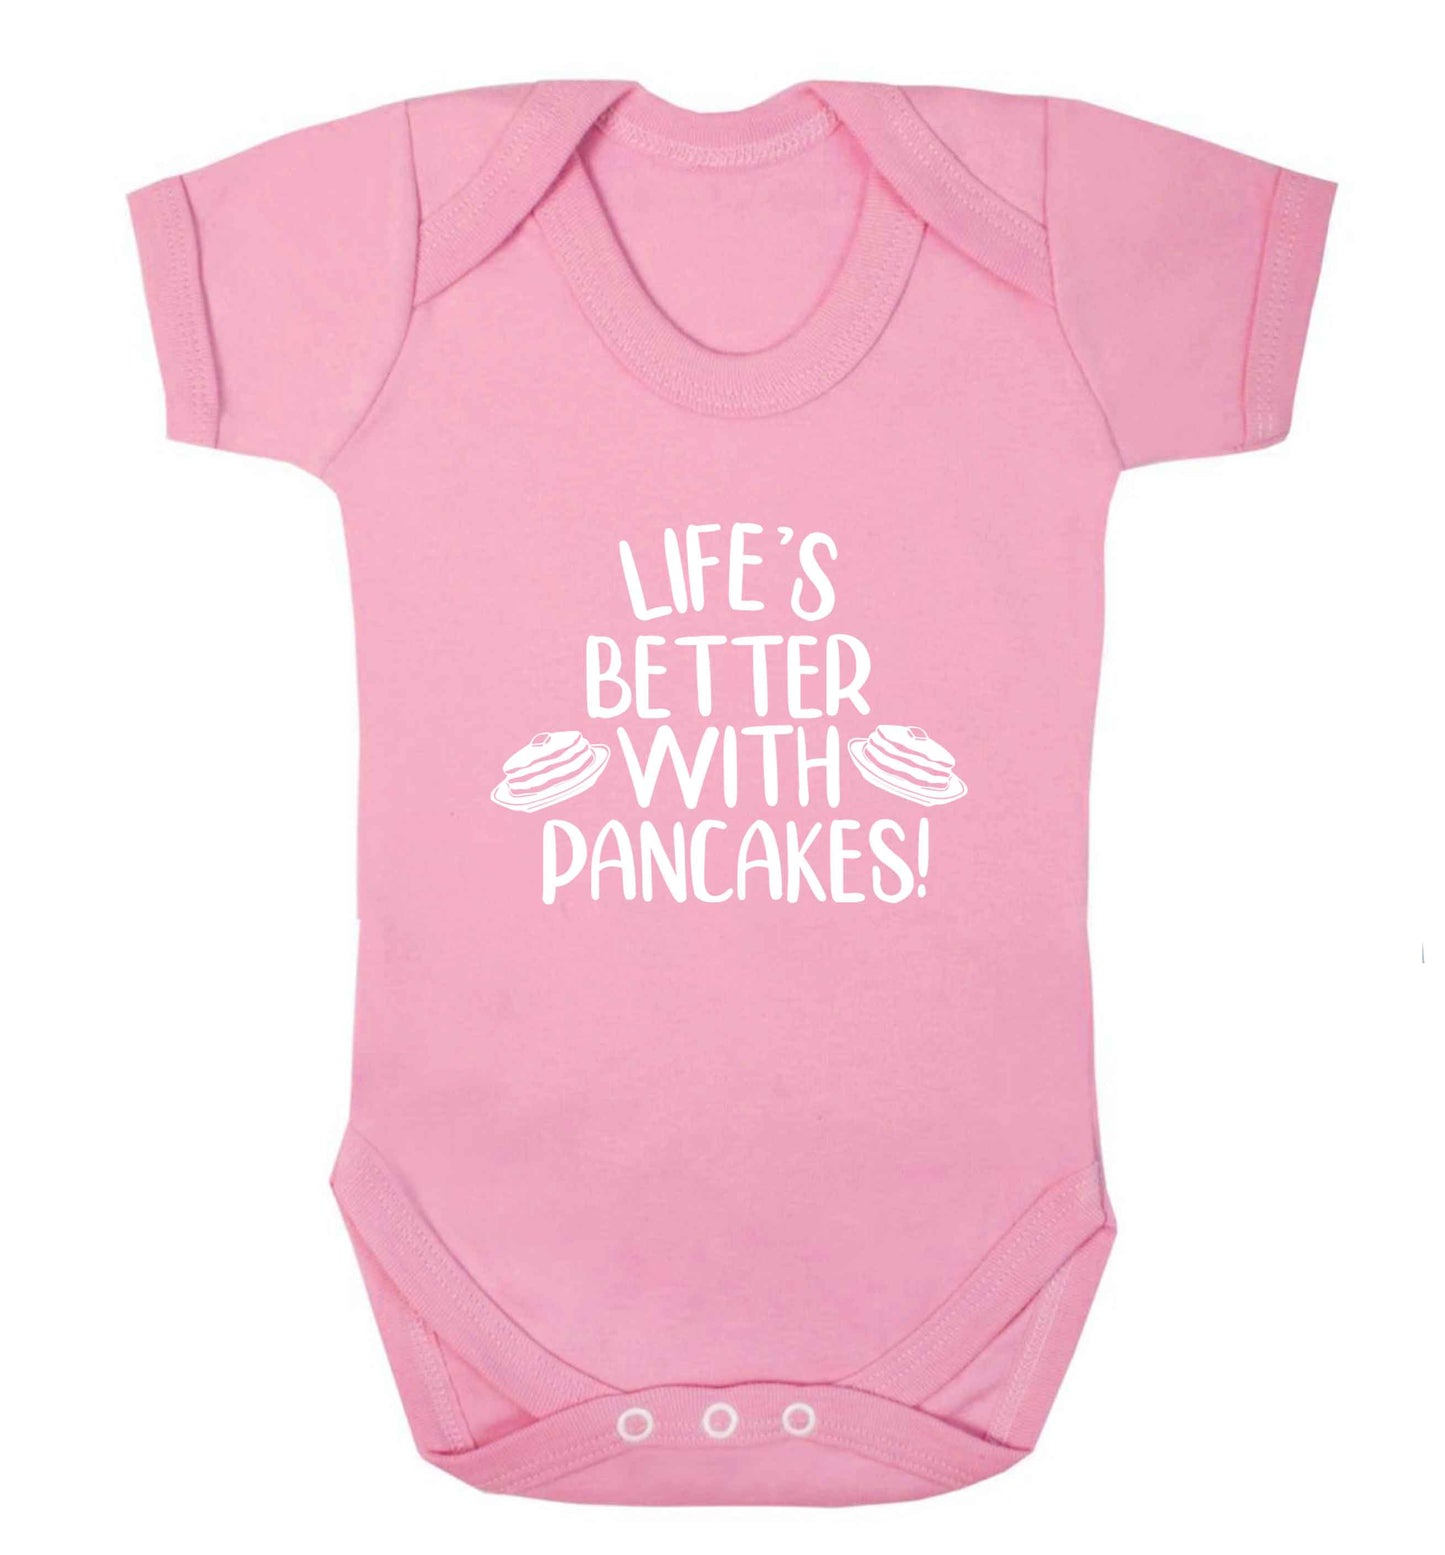 Life's better with pancakes baby vest pale pink 18-24 months